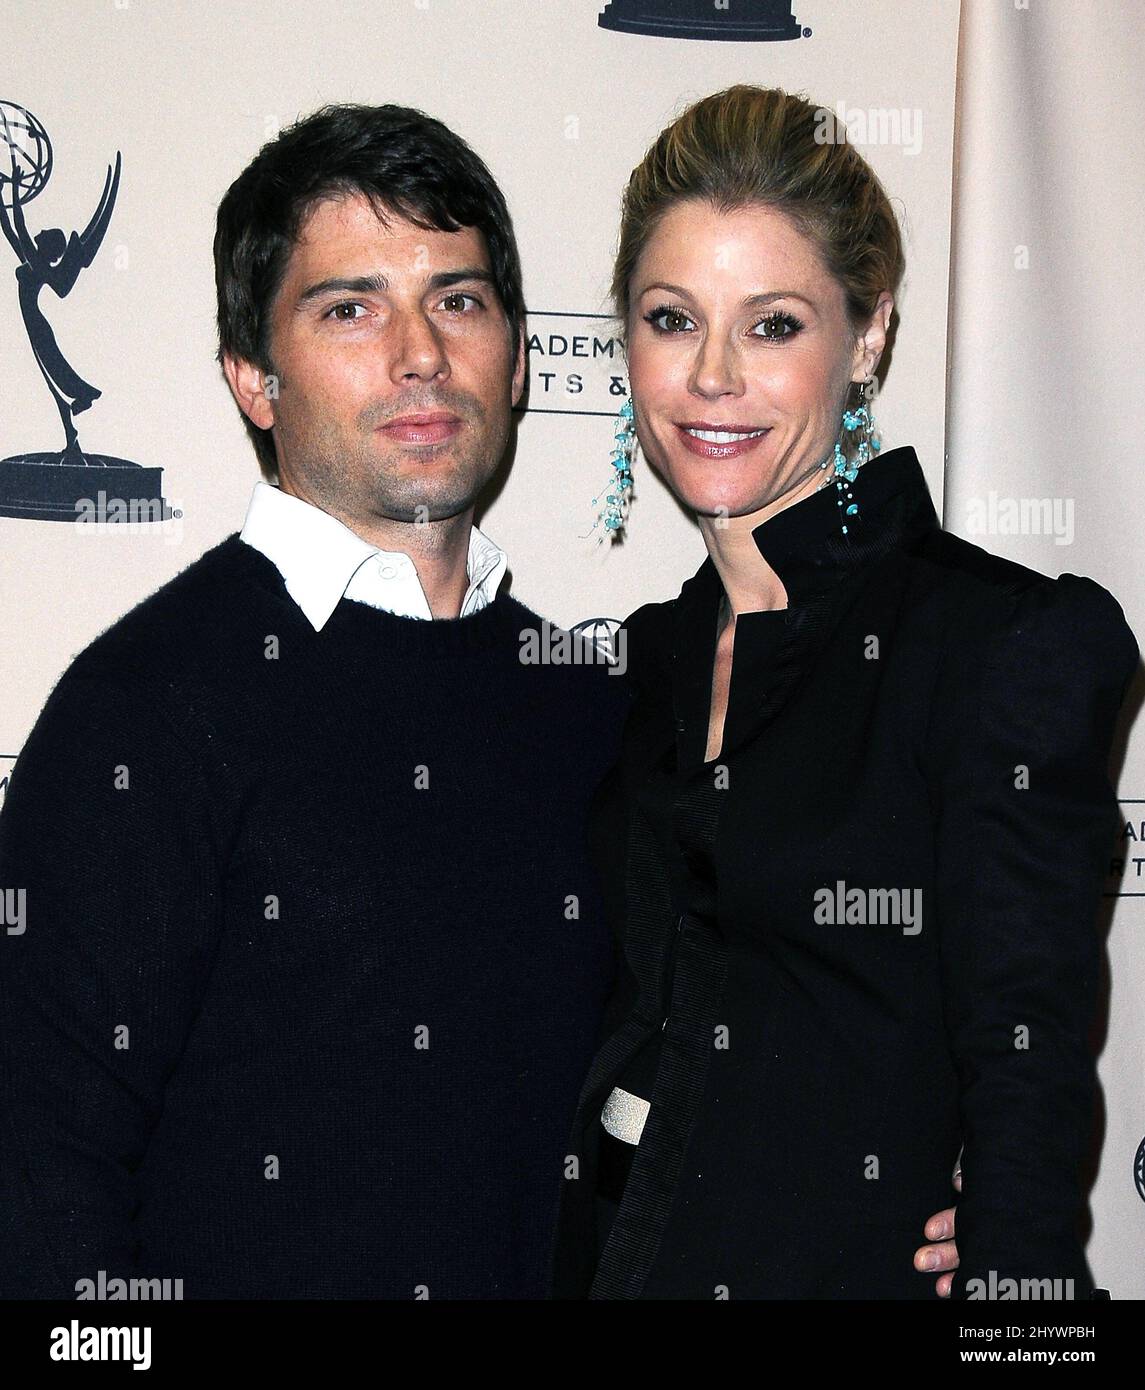 Julie Bowen, Scott Phillips at the Academy of Television Arts and Sciences presents An Evening with 'Modern Family' held at the Leonard H. Goldenson Theatre in North Hollywood, California. Stock Photo